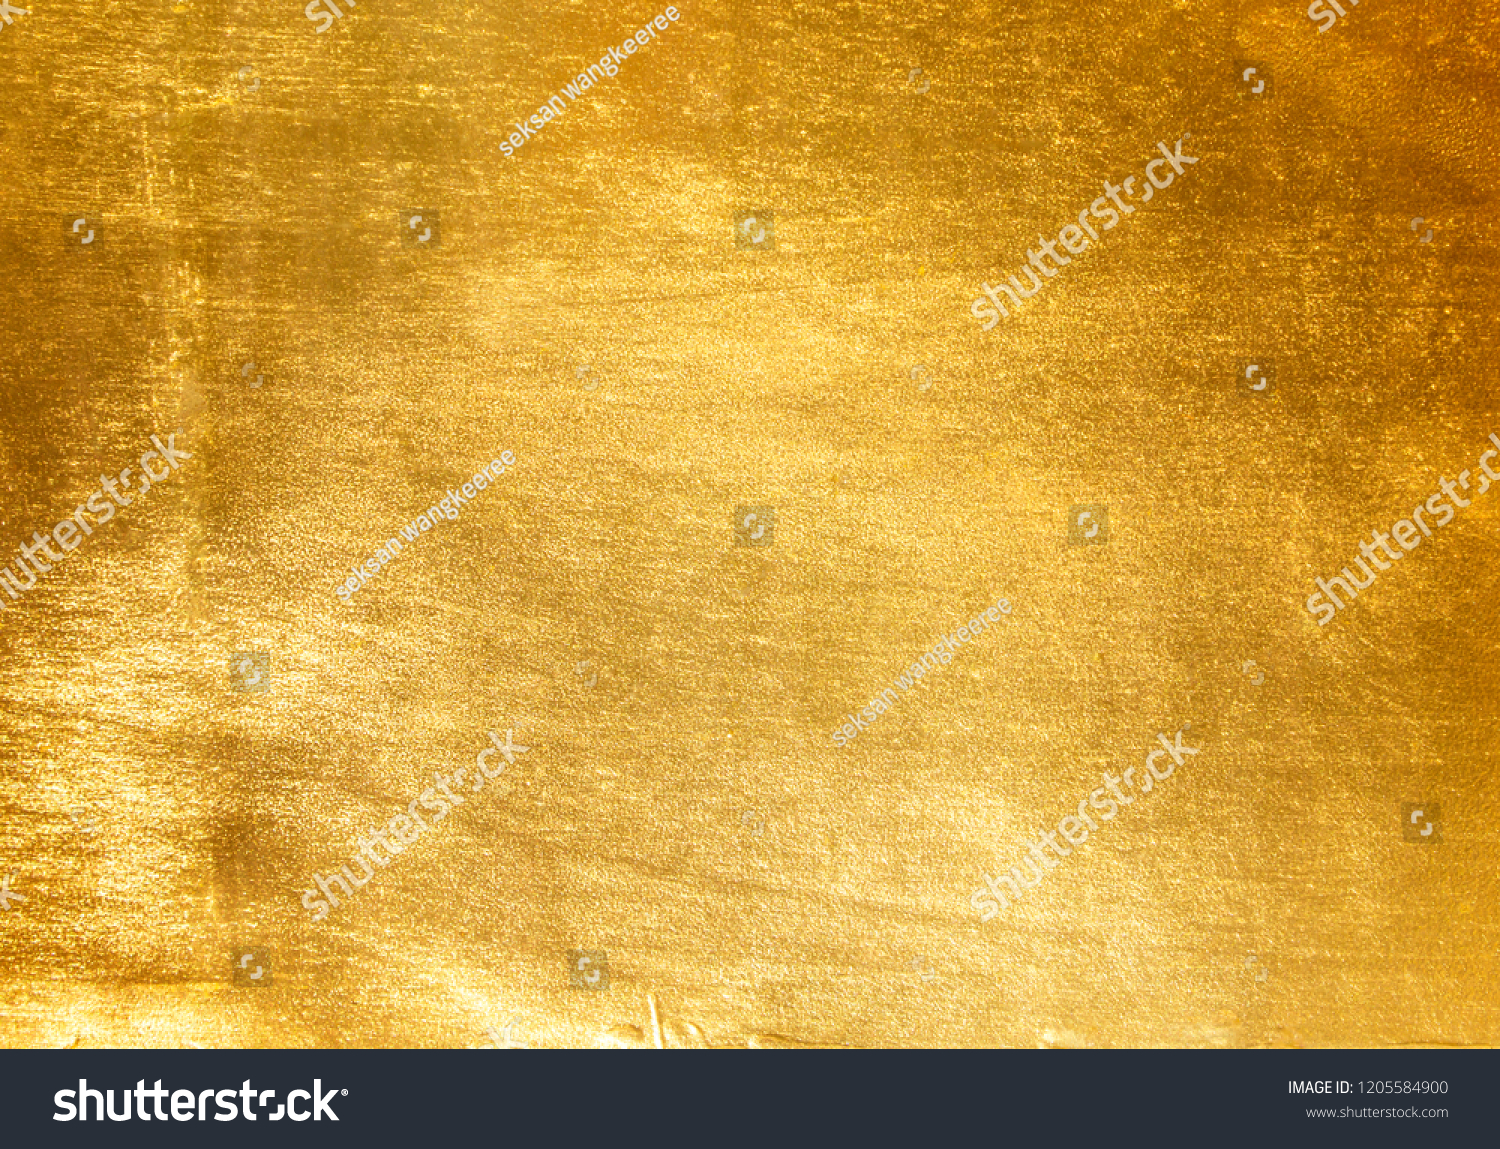 Shiny yellow leaf gold foil texture background #1205584900